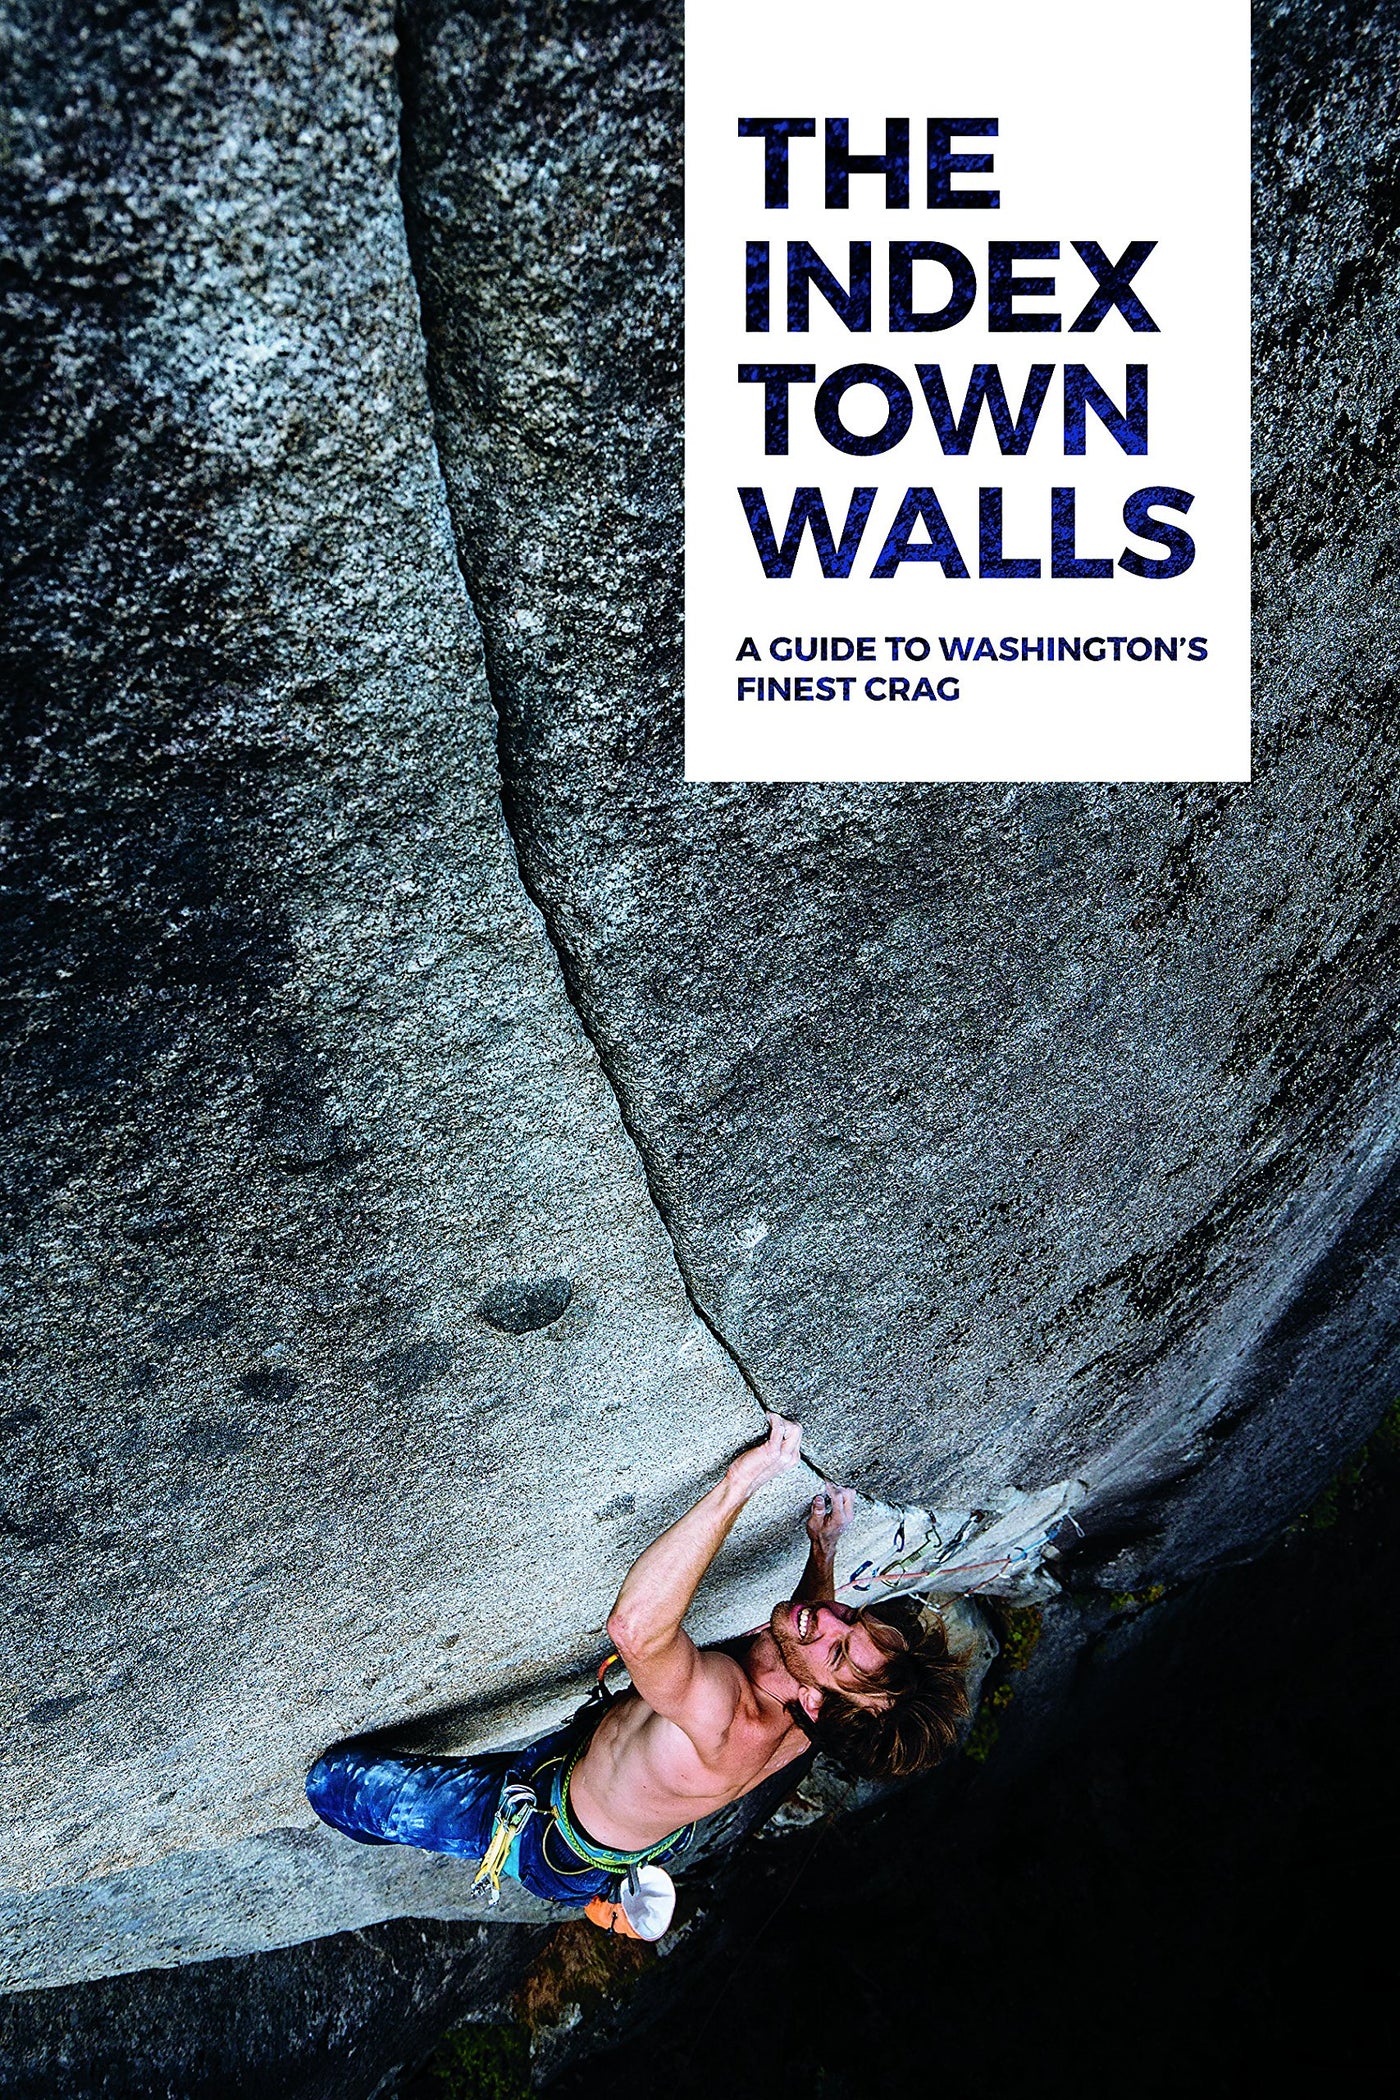 The Index Town Walls: A Guide to Washington's Finest Crag